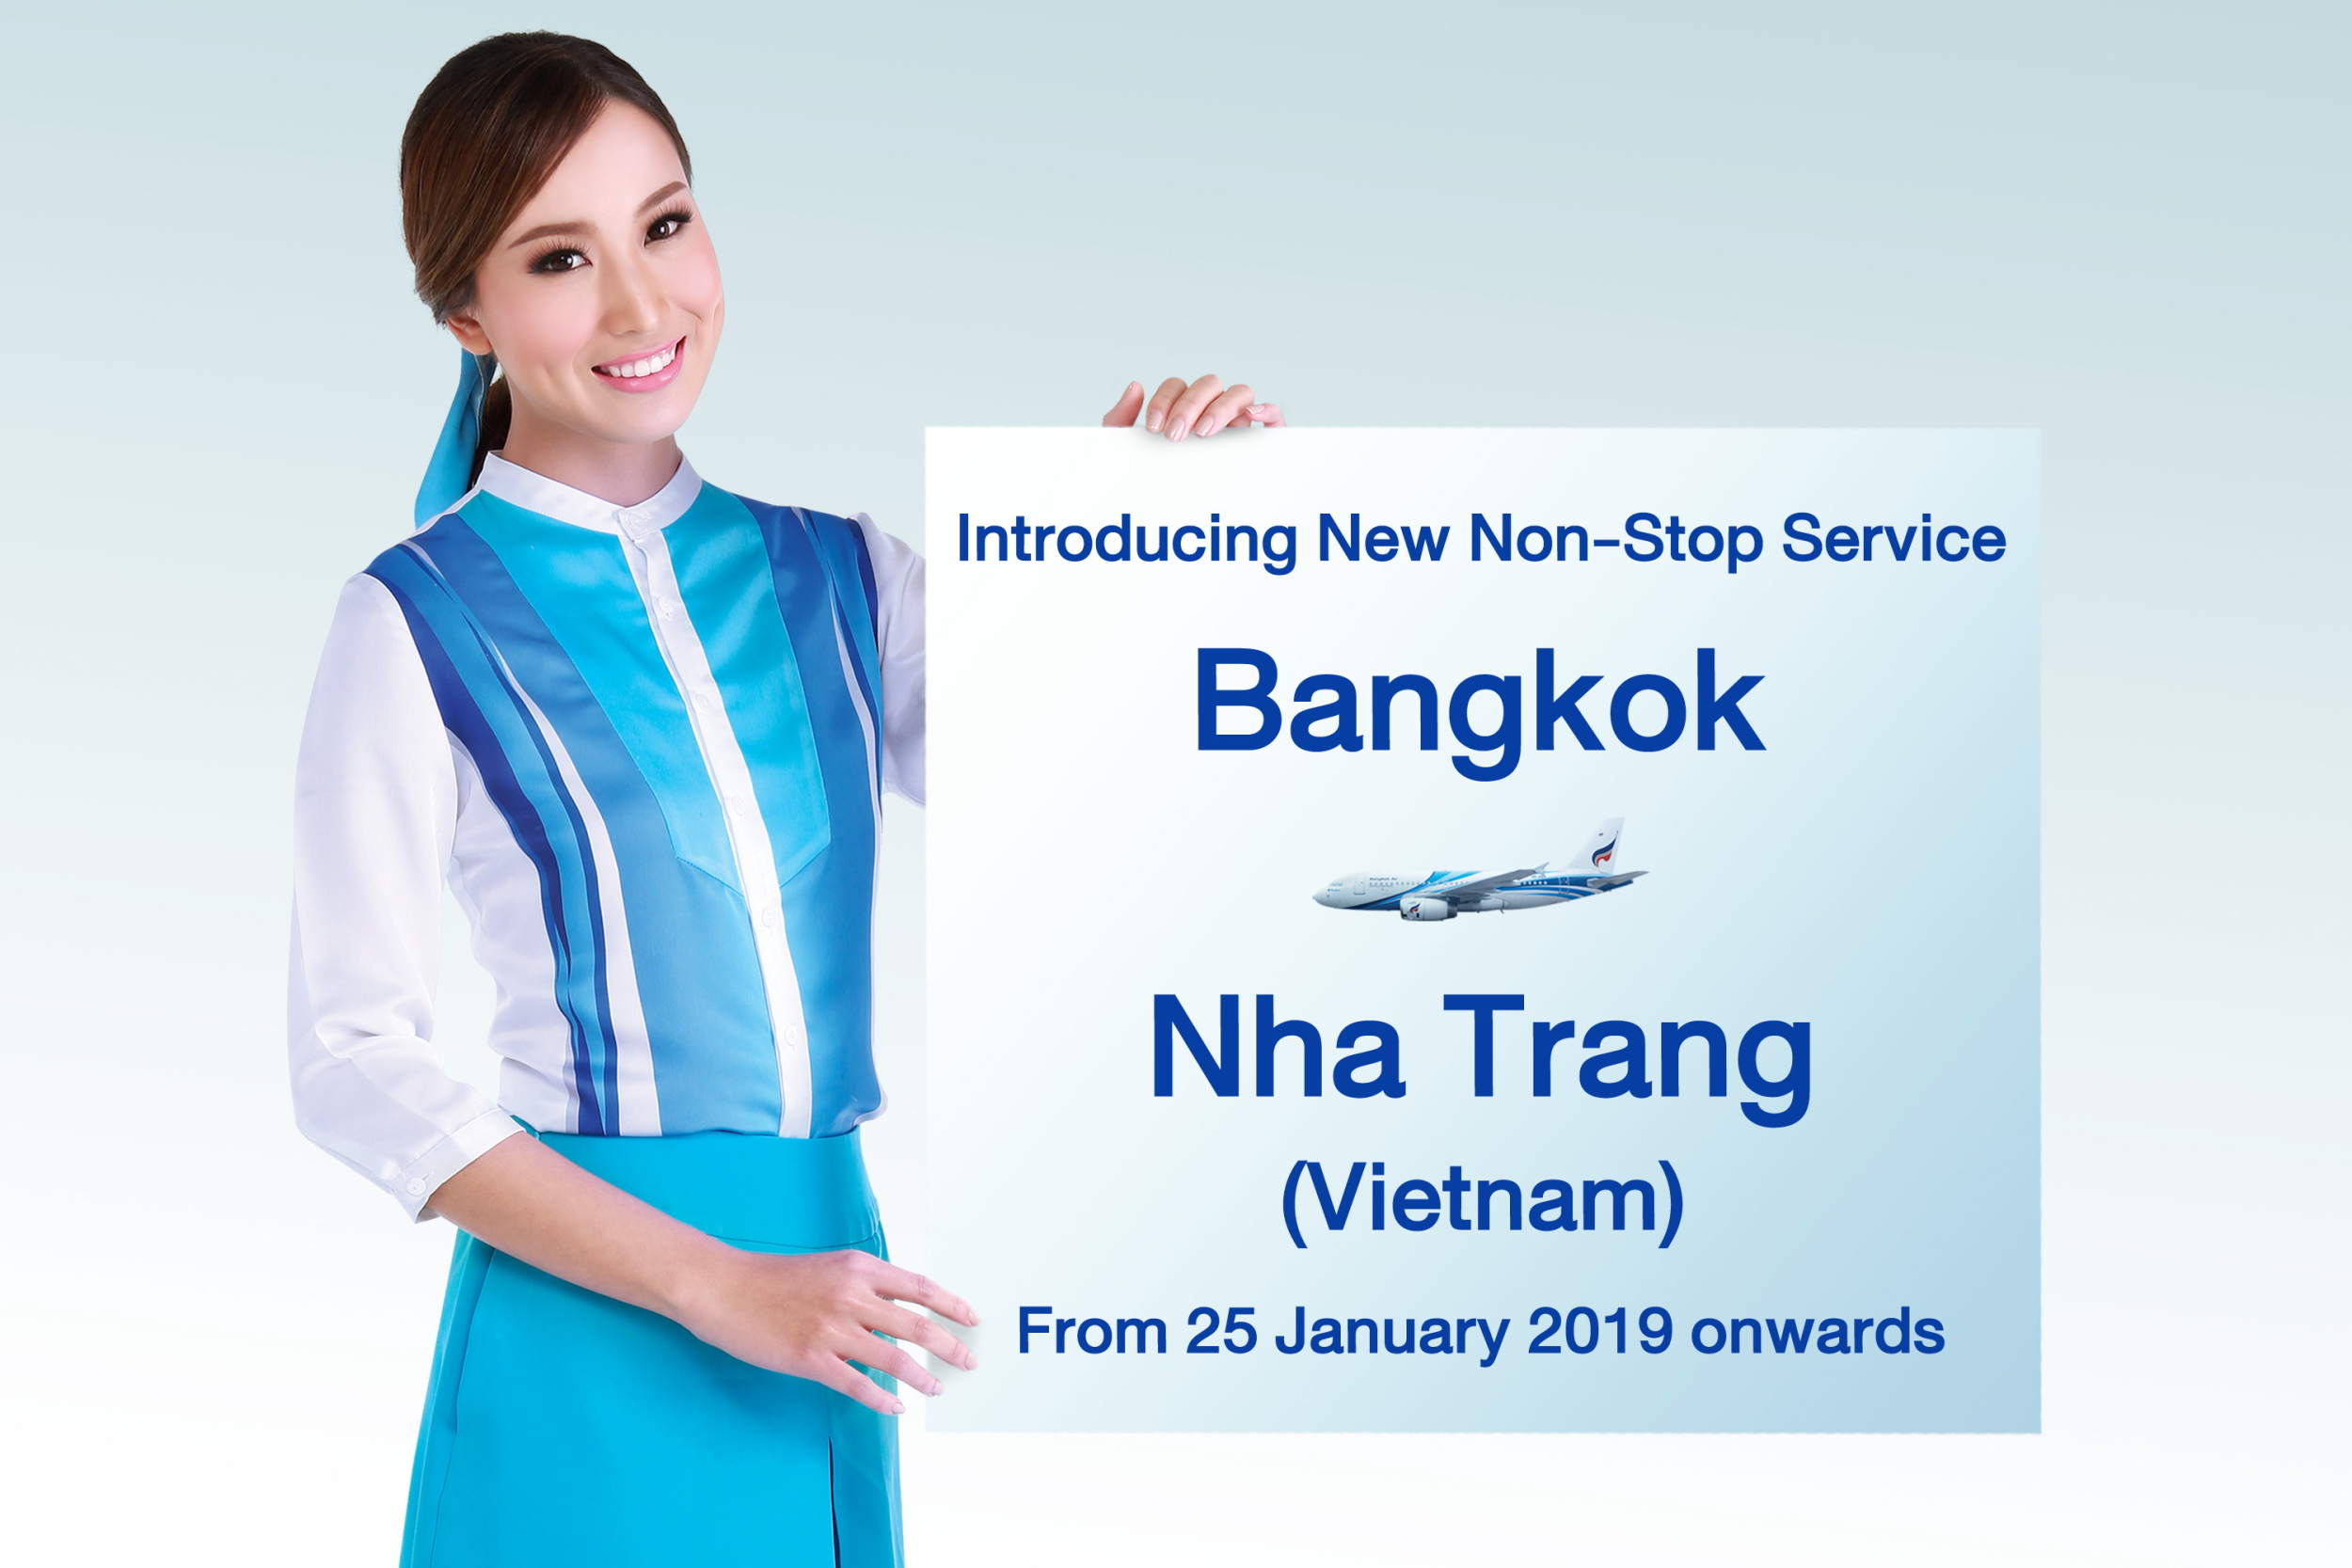 Bangkok Airways has unveiled plans to launch flights between Bangkok and Nha Trang, Vietnam. The airline will offer four flights per week on Mondays, Wednesdays Fridays and Sundays, with a 144-seat Airbus A319 aircraft, starting from 25 January 2019. Click to enlarge.